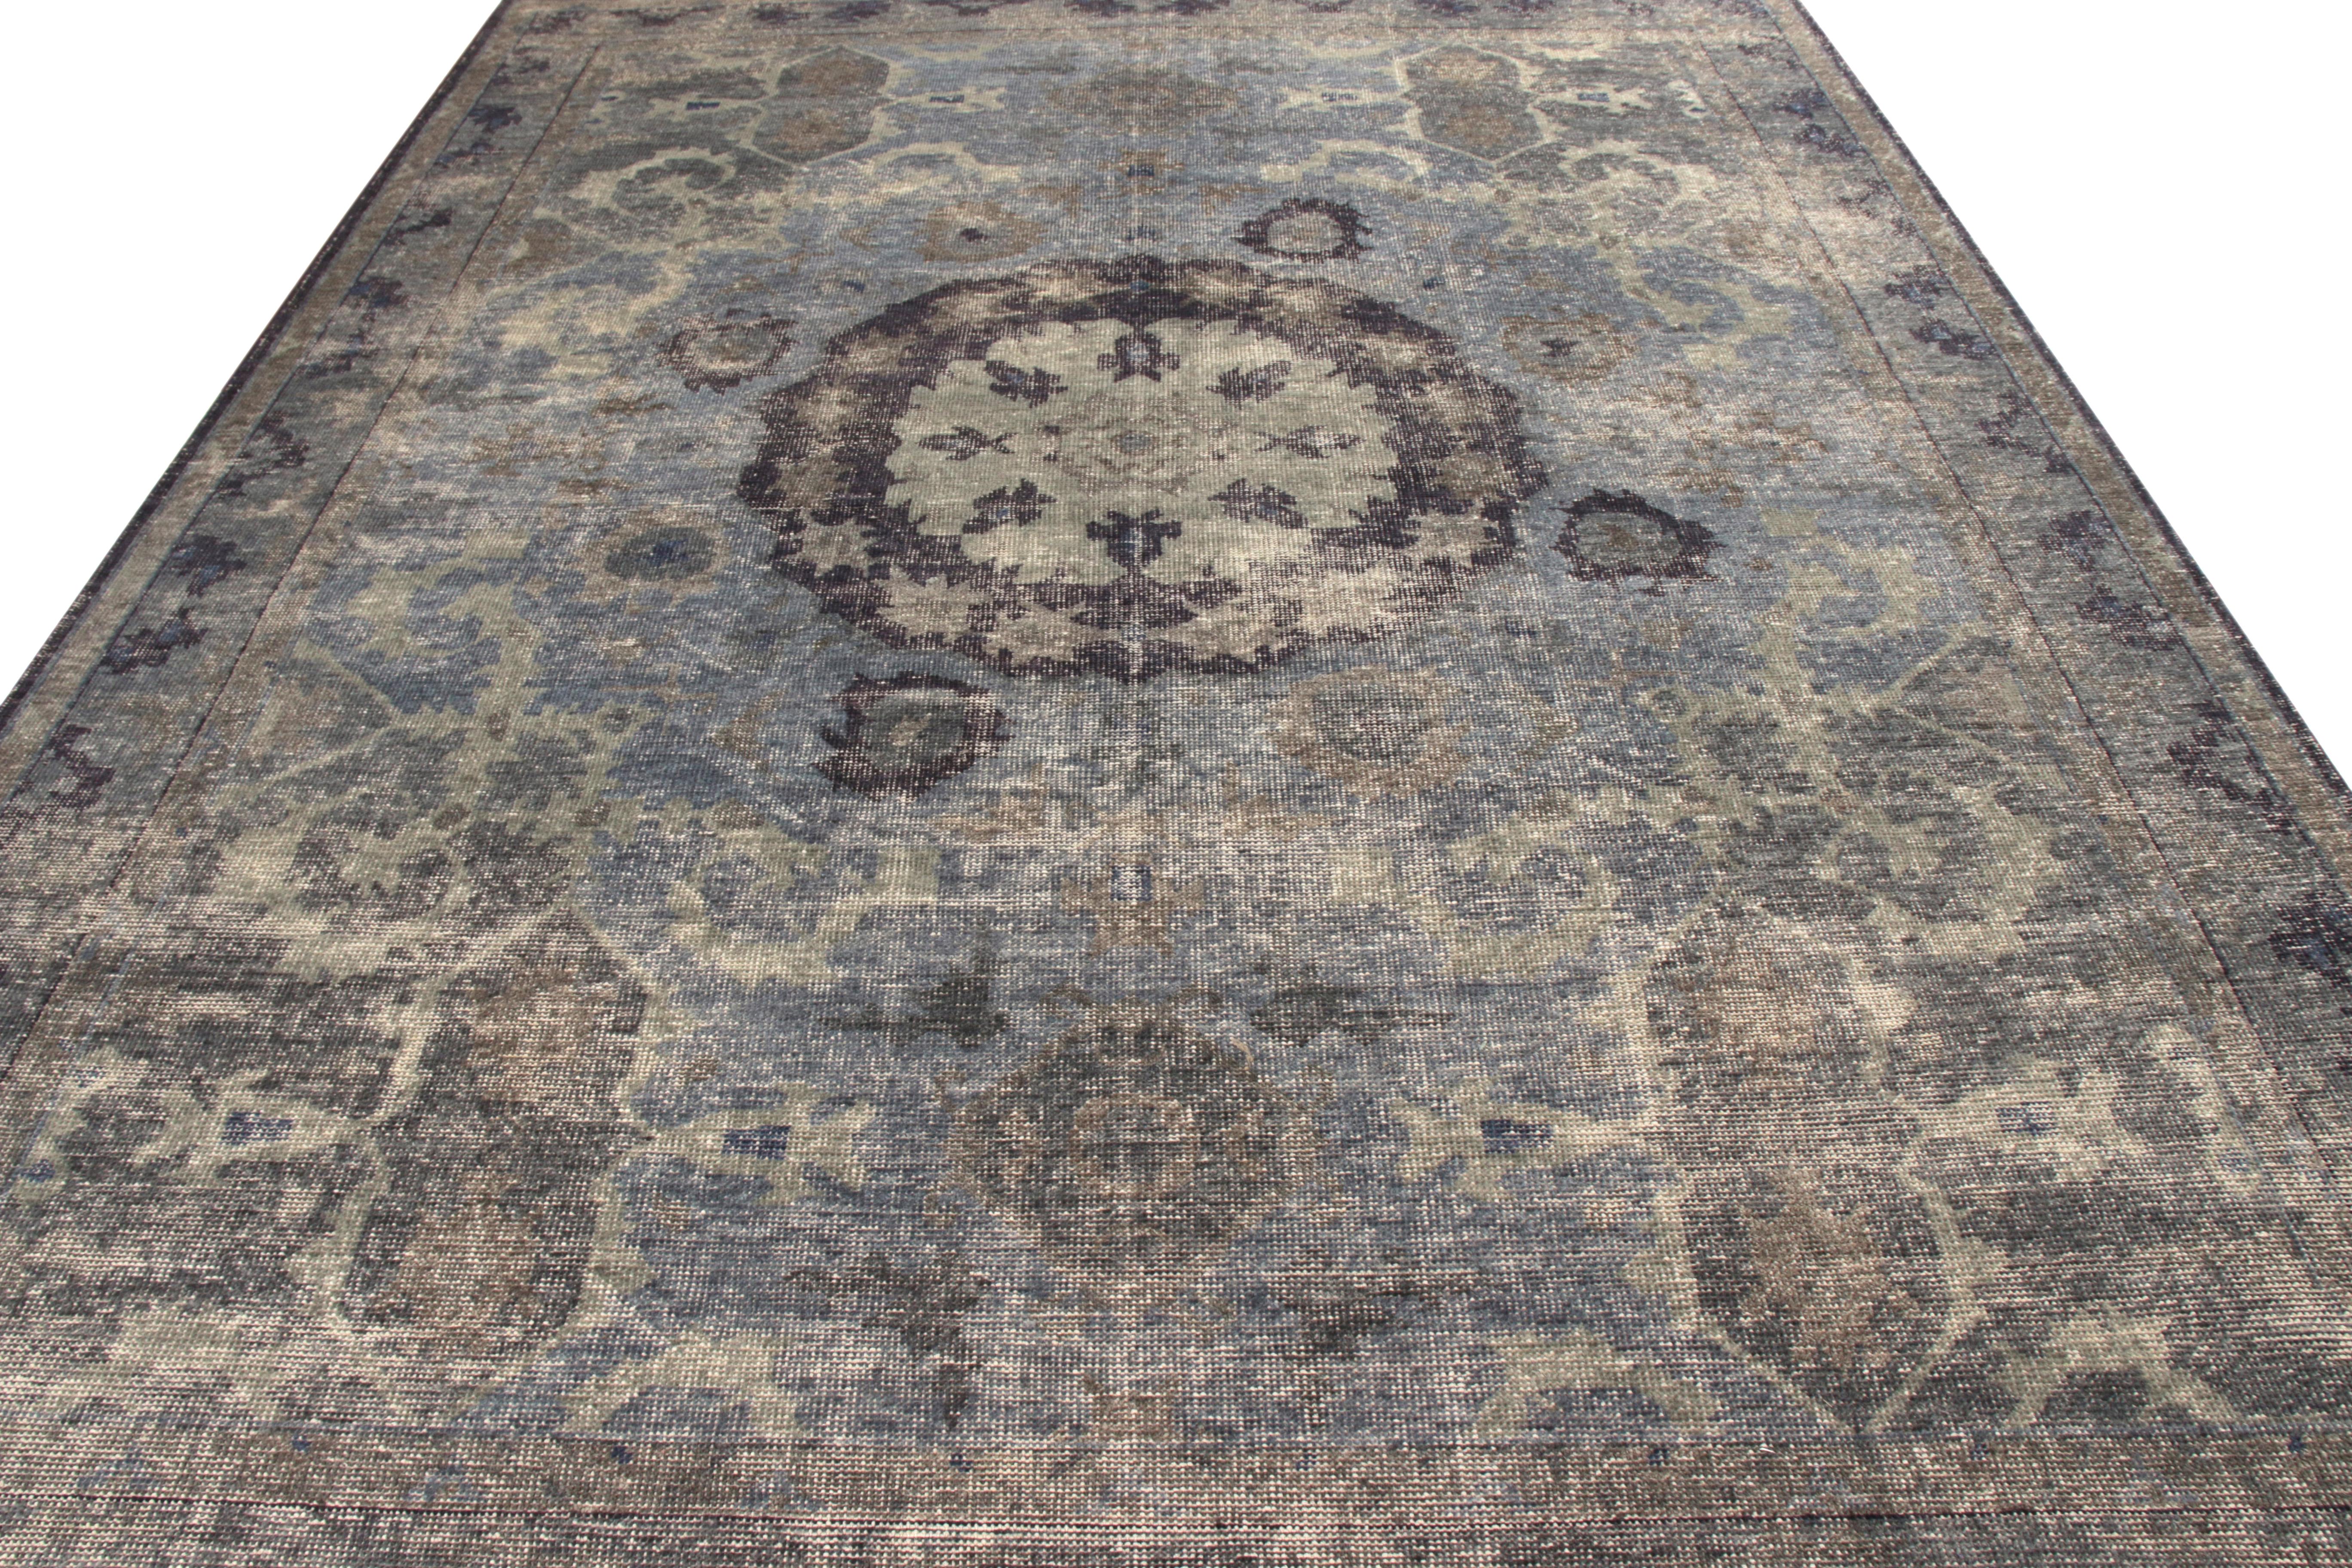 A 9 x 12 ode to celebrated Oriental rug styles, from the classic selections in Rug & Kilim’s Homage Collection. Hand knotted in wool with a shabby-chic, distressed texture, enjoying a sophisticated medallion style in blue and gray. The play of these